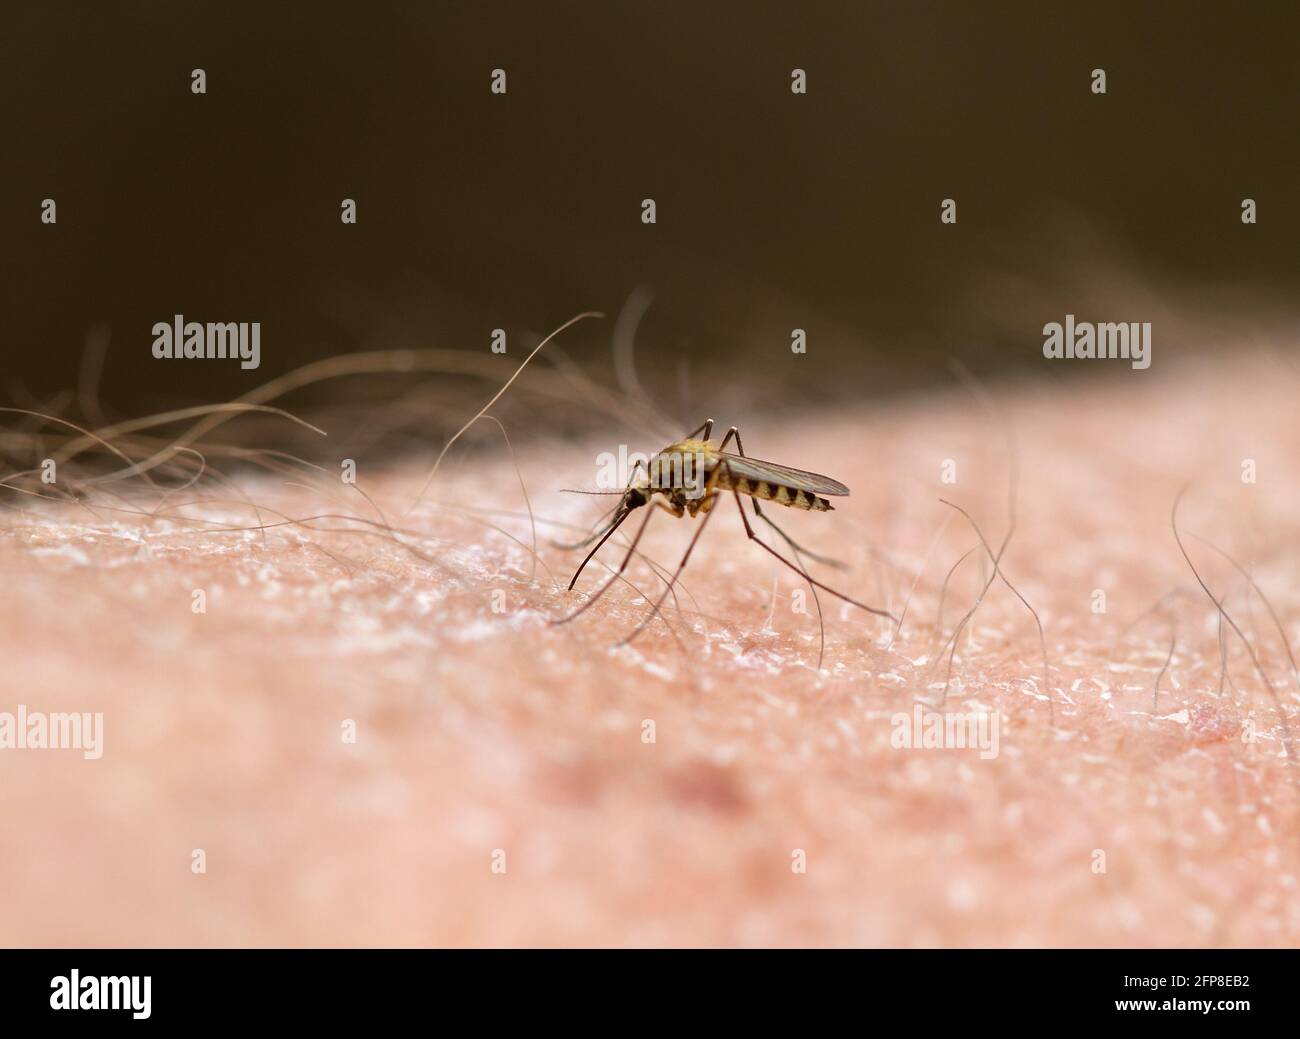 A Common house mosquito bites into a human's arm and sucks blood Stock Photo